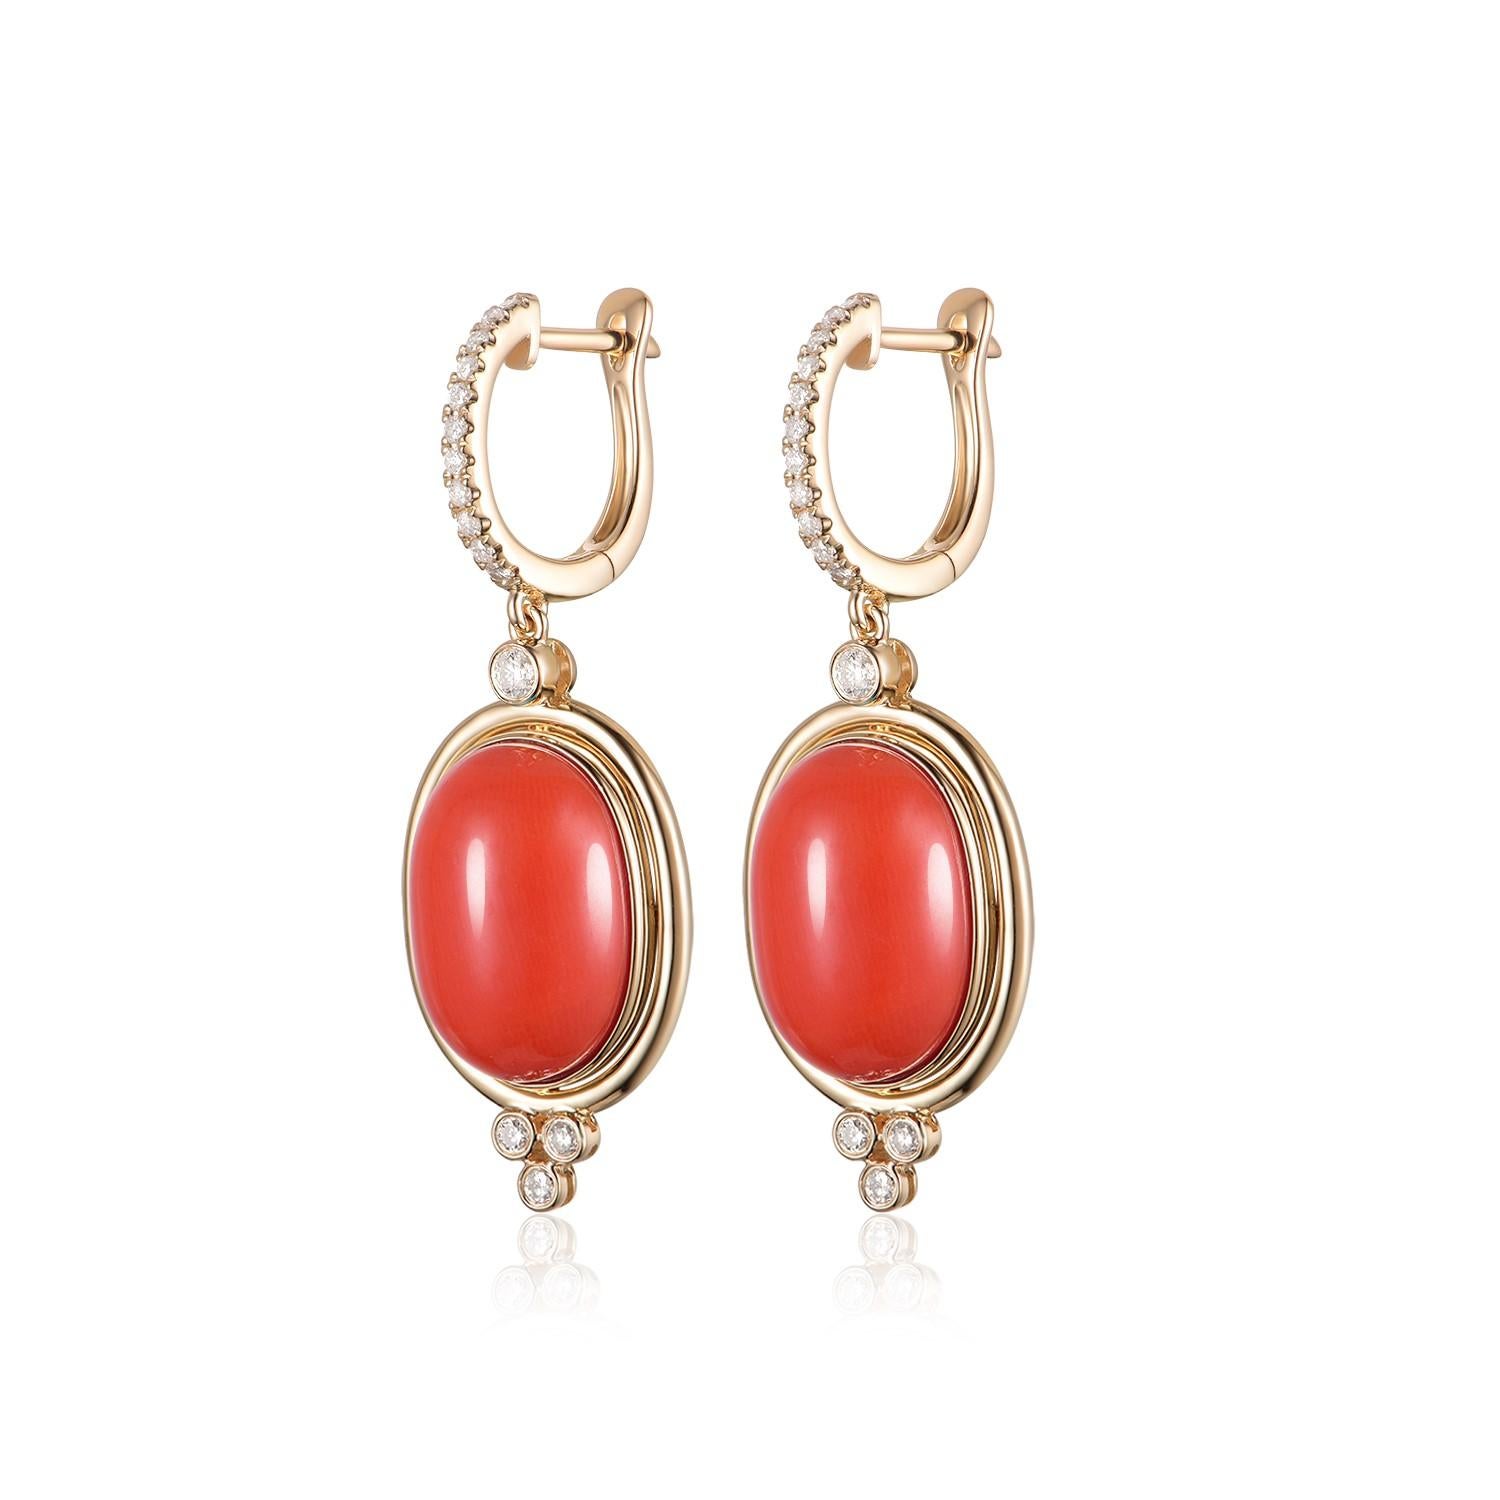 Crafted with impeccable precision, these drop earrings are a testament to the perfect blend of nature's beauty and human artistry. At the heart of this ornate creation lies the salmon-colored coral, weighing an impressive 12.85 carats. This shade of